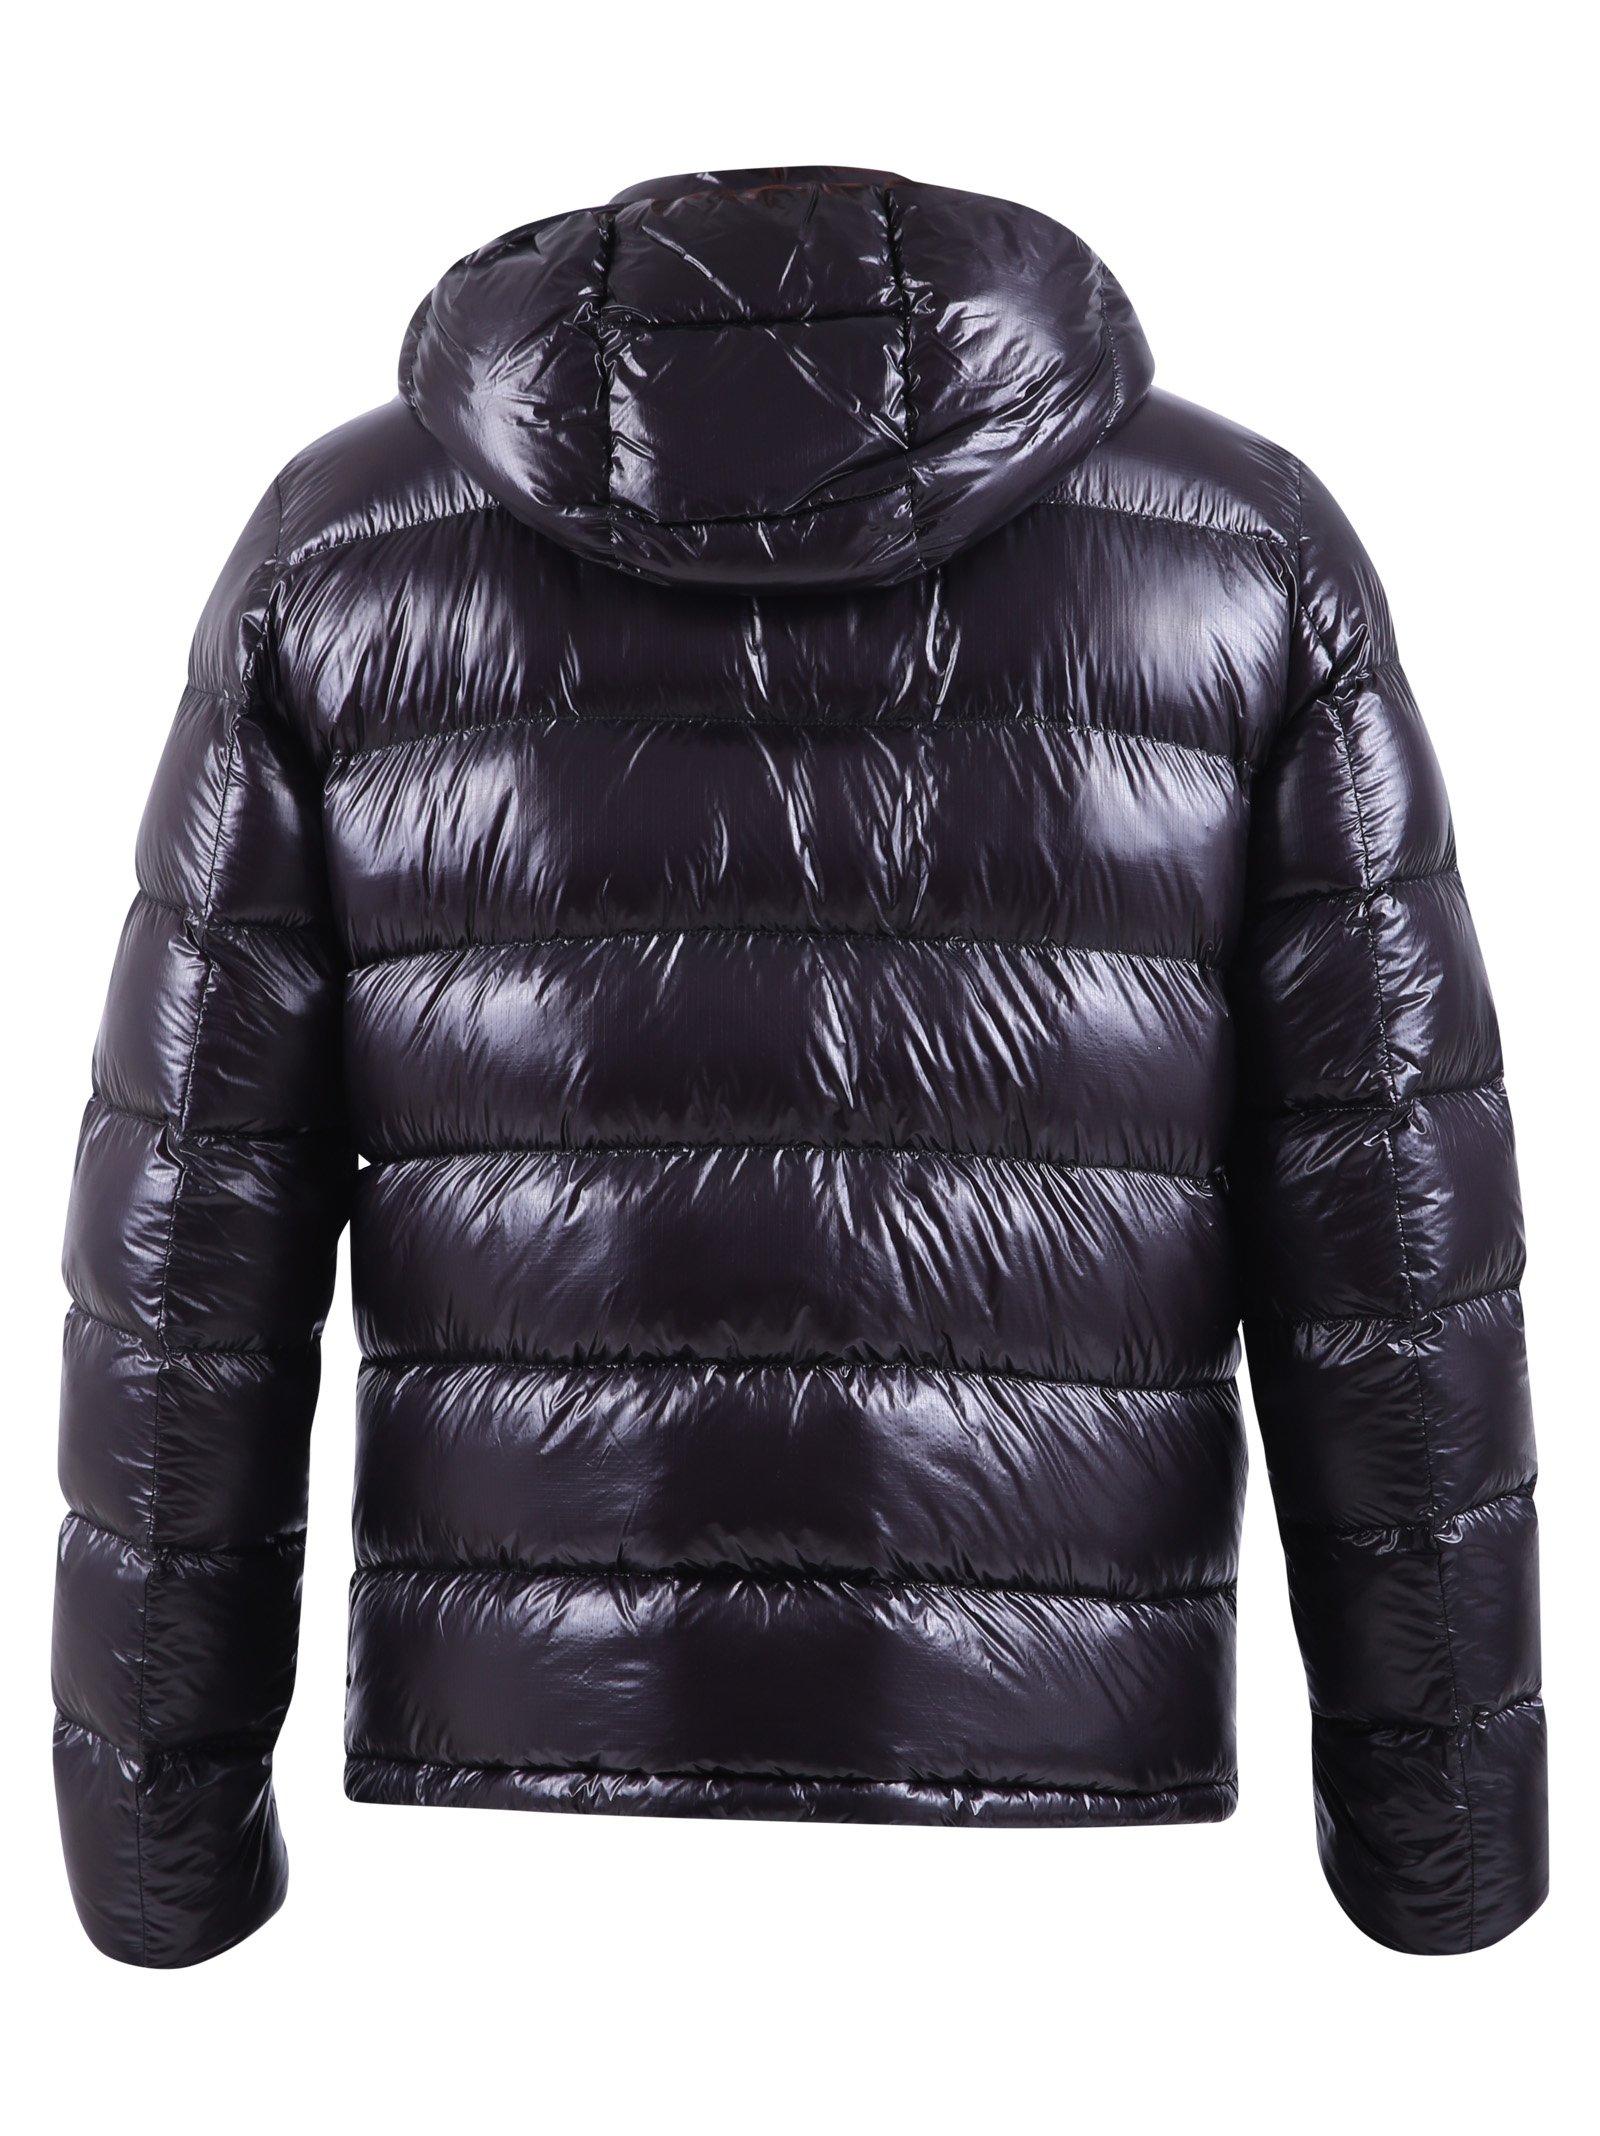 Herno Synthetic Padded Down Jacket in Black for Men - Lyst